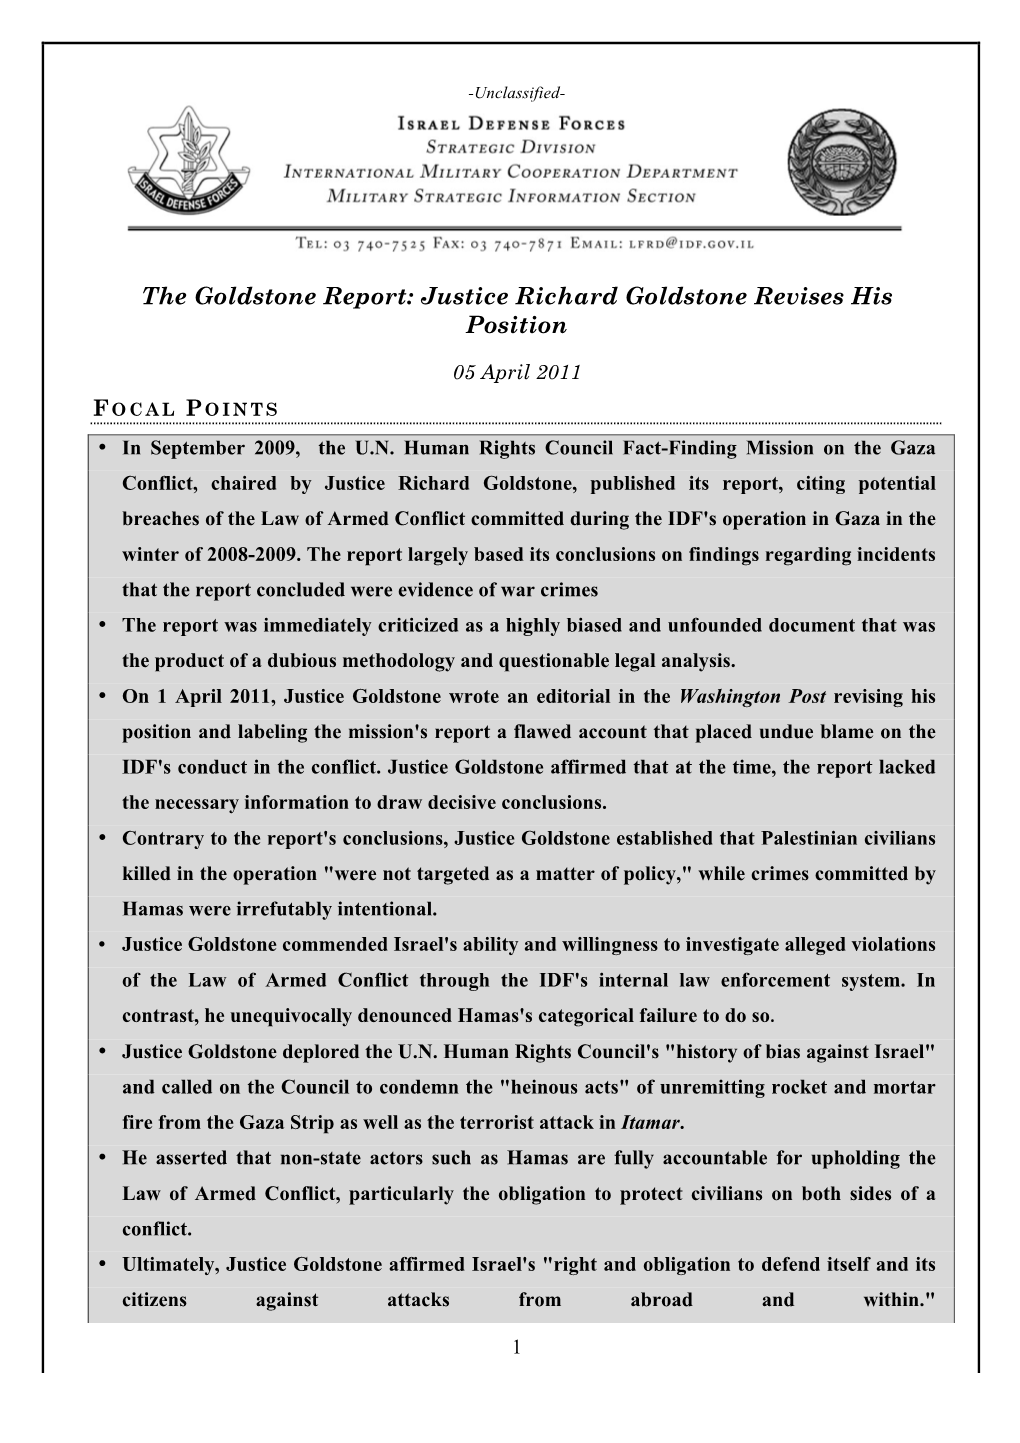 The Goldstone Report: Justice Richard Goldstone Revises His Position